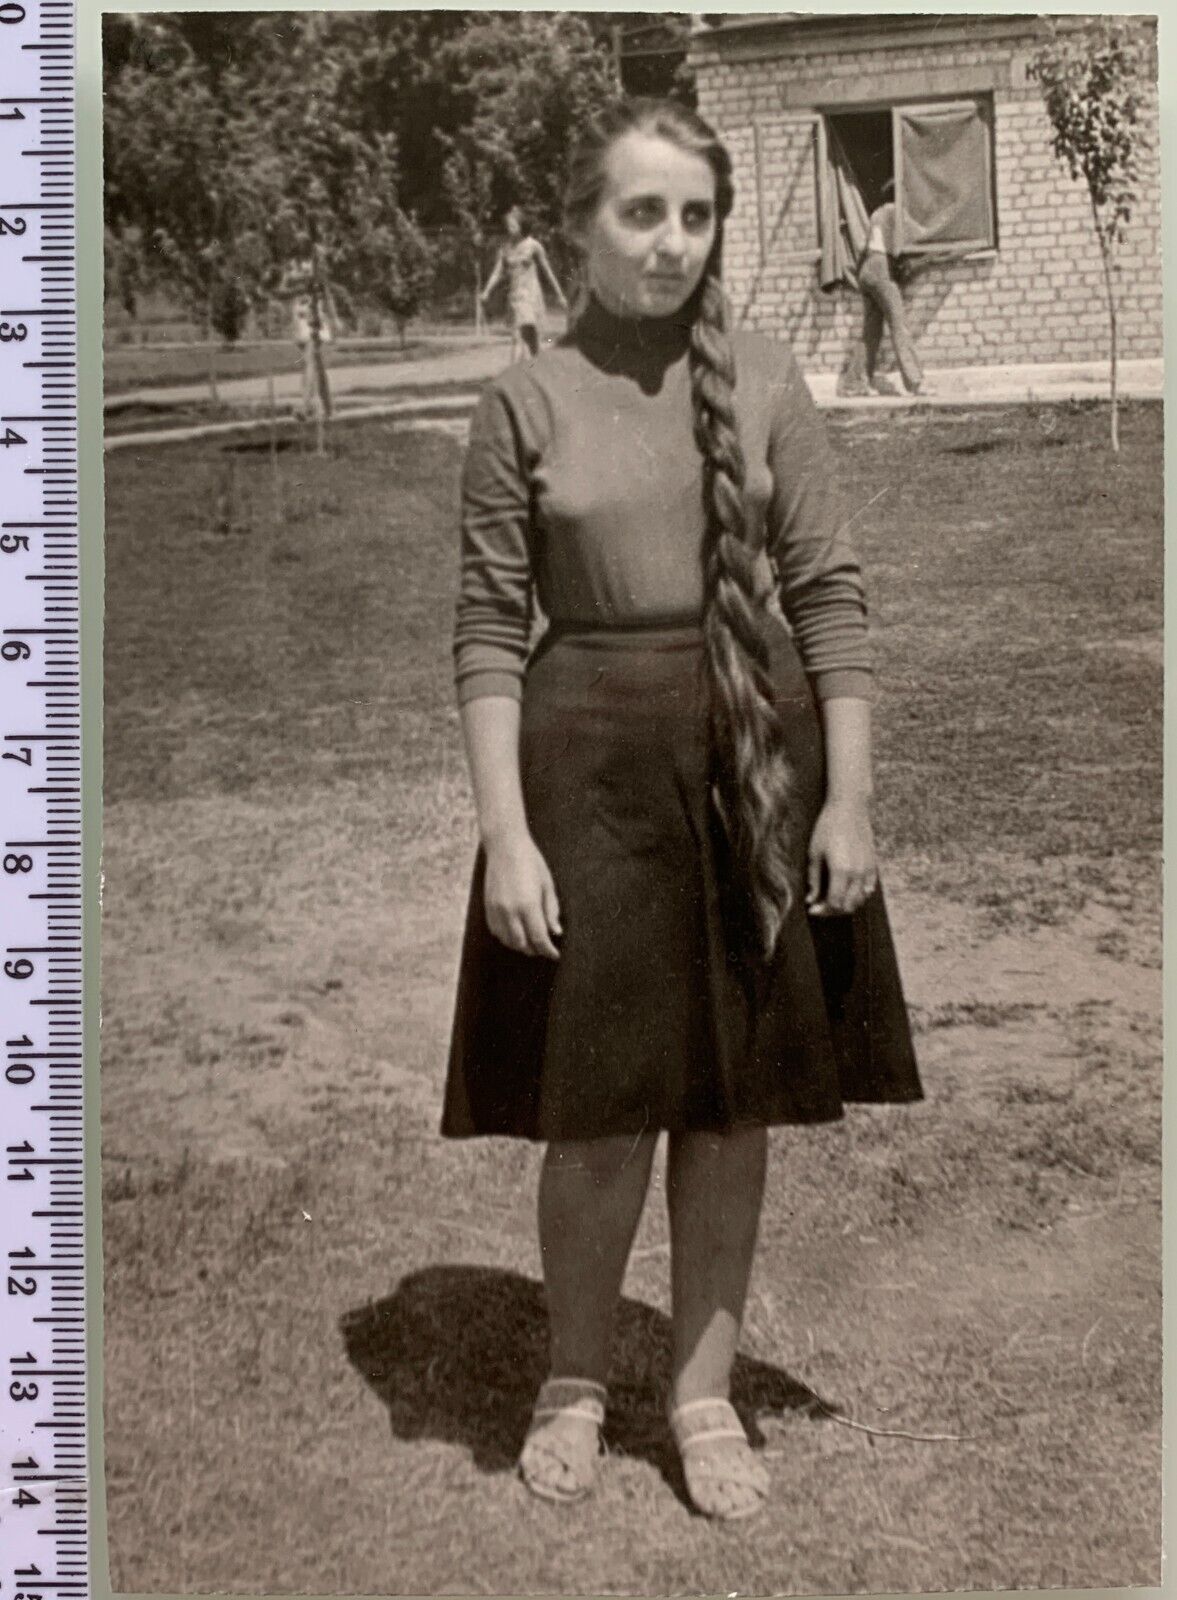 1950s Soviet Pretty Young Girl Pigtail Long Hair Woman USSR Vintage Photo